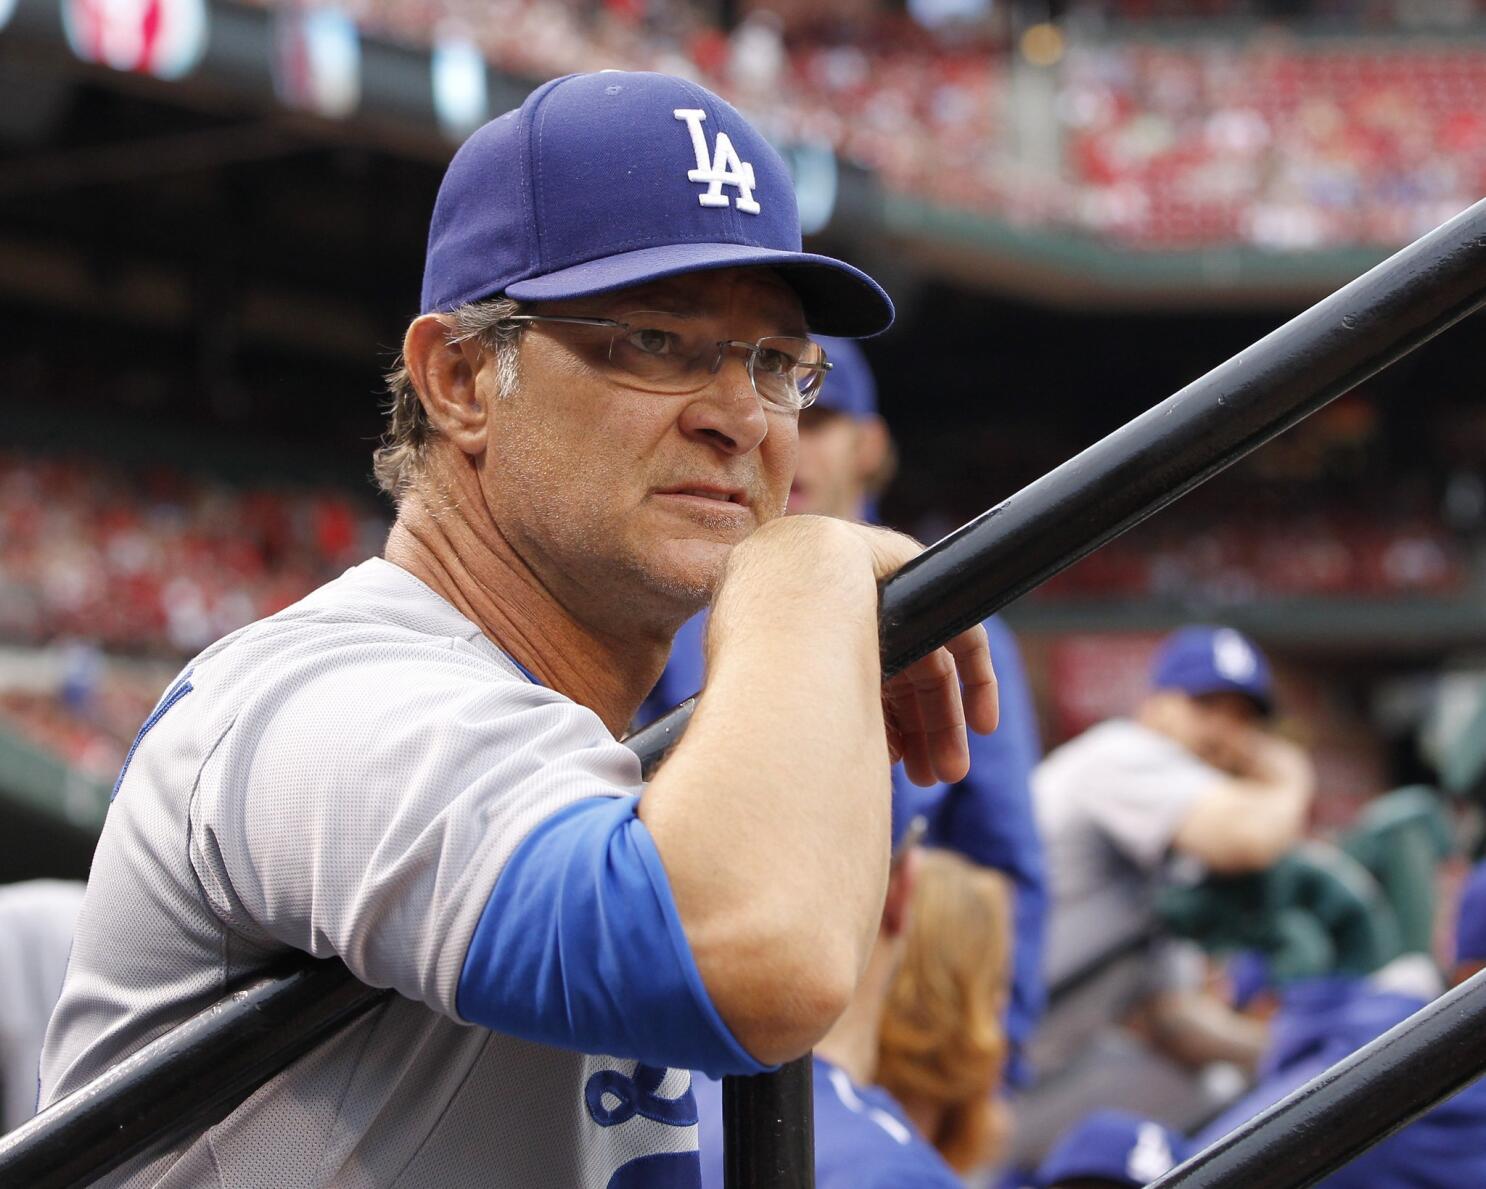 Miami Marlins hire Don Mattingly as manager - ESPN